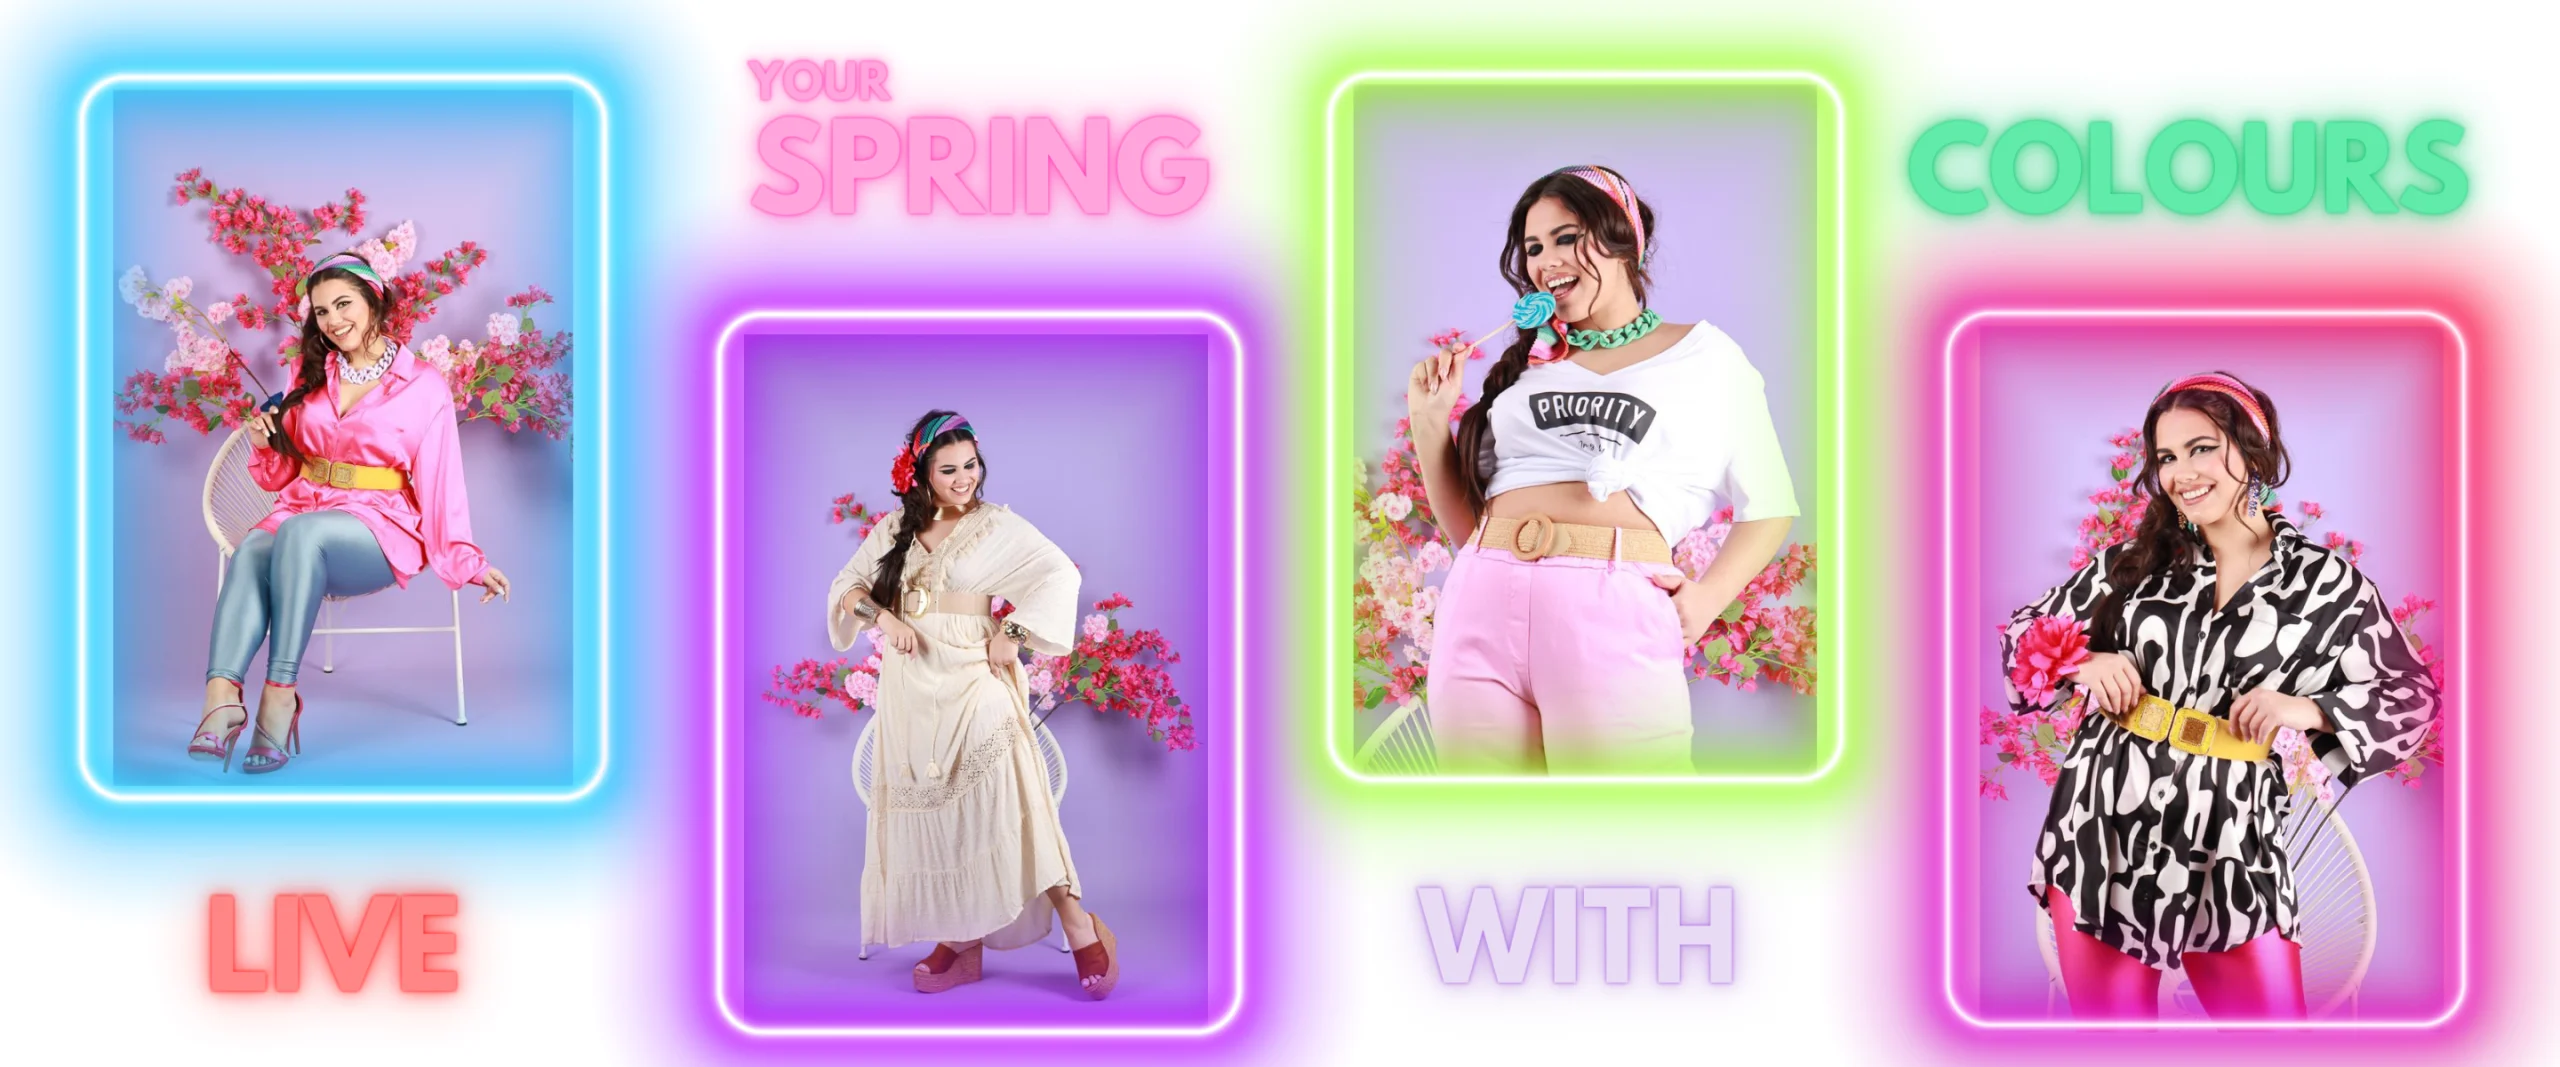 LIVE YOUR SPRING WITH COLOURS